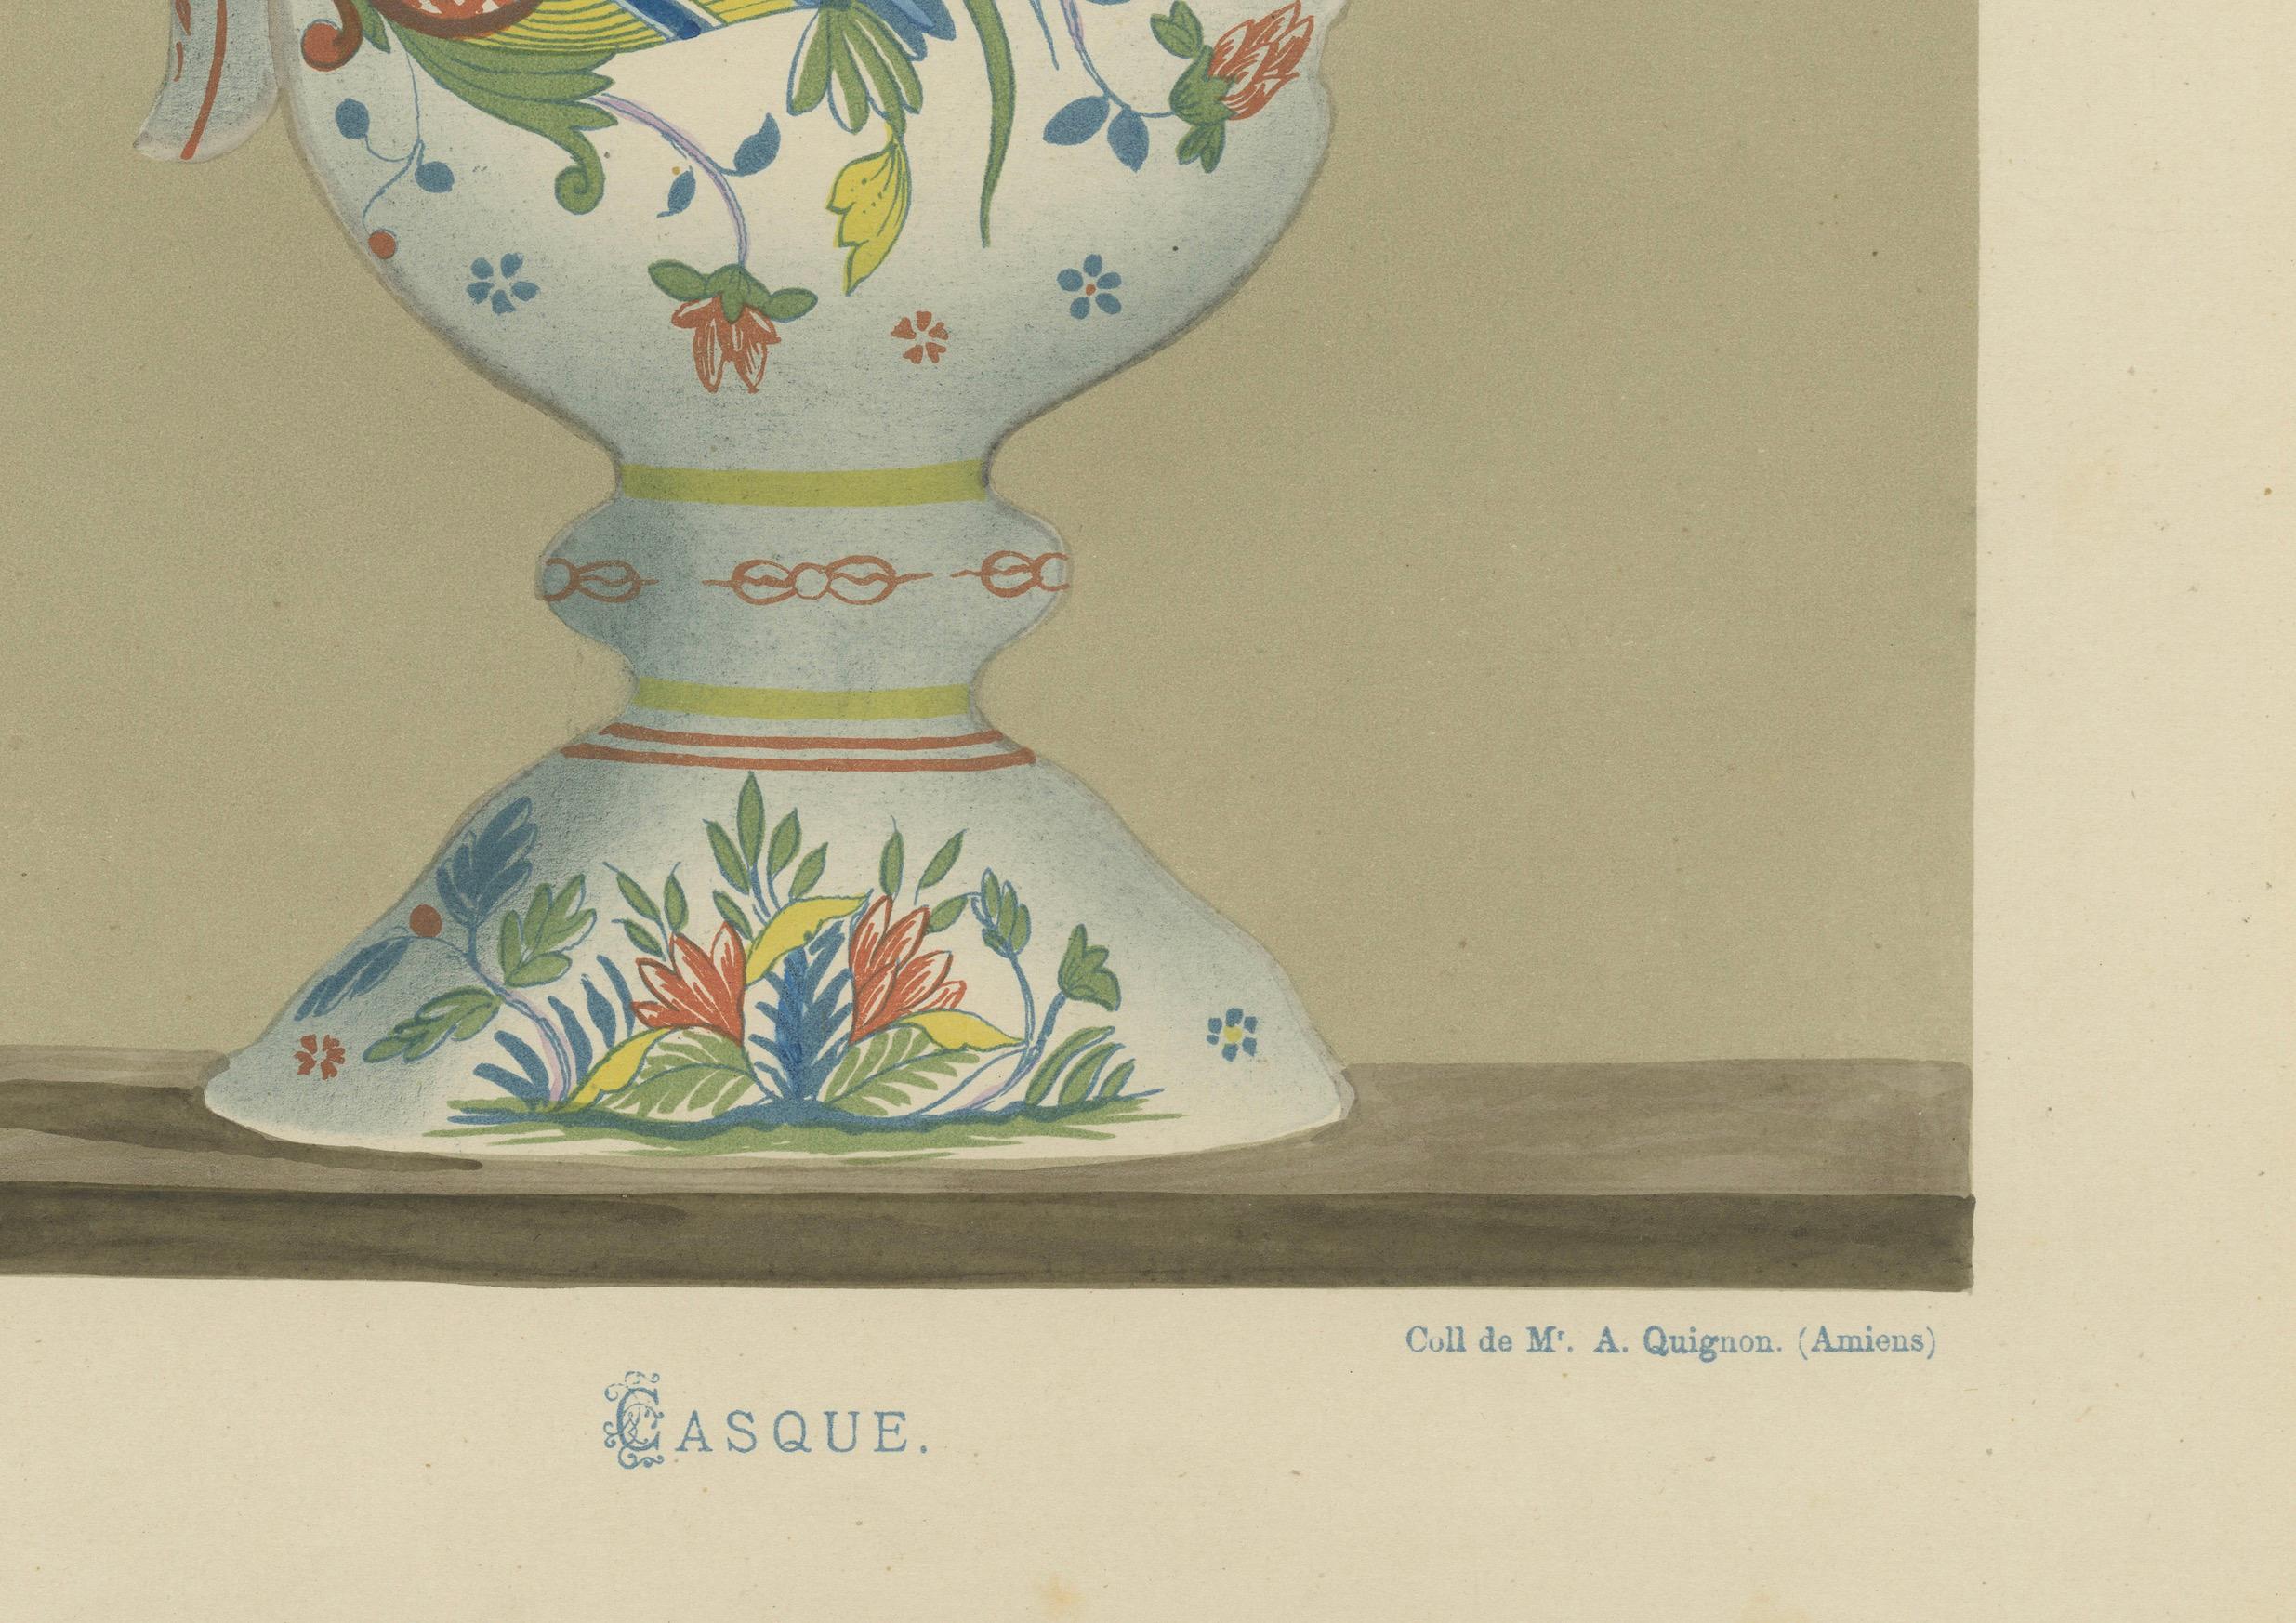 The chromolithograph features a striking ceramic piece from Sinceny, notable for its distinctive floral and aviary motifs. The piece, labeled as a 